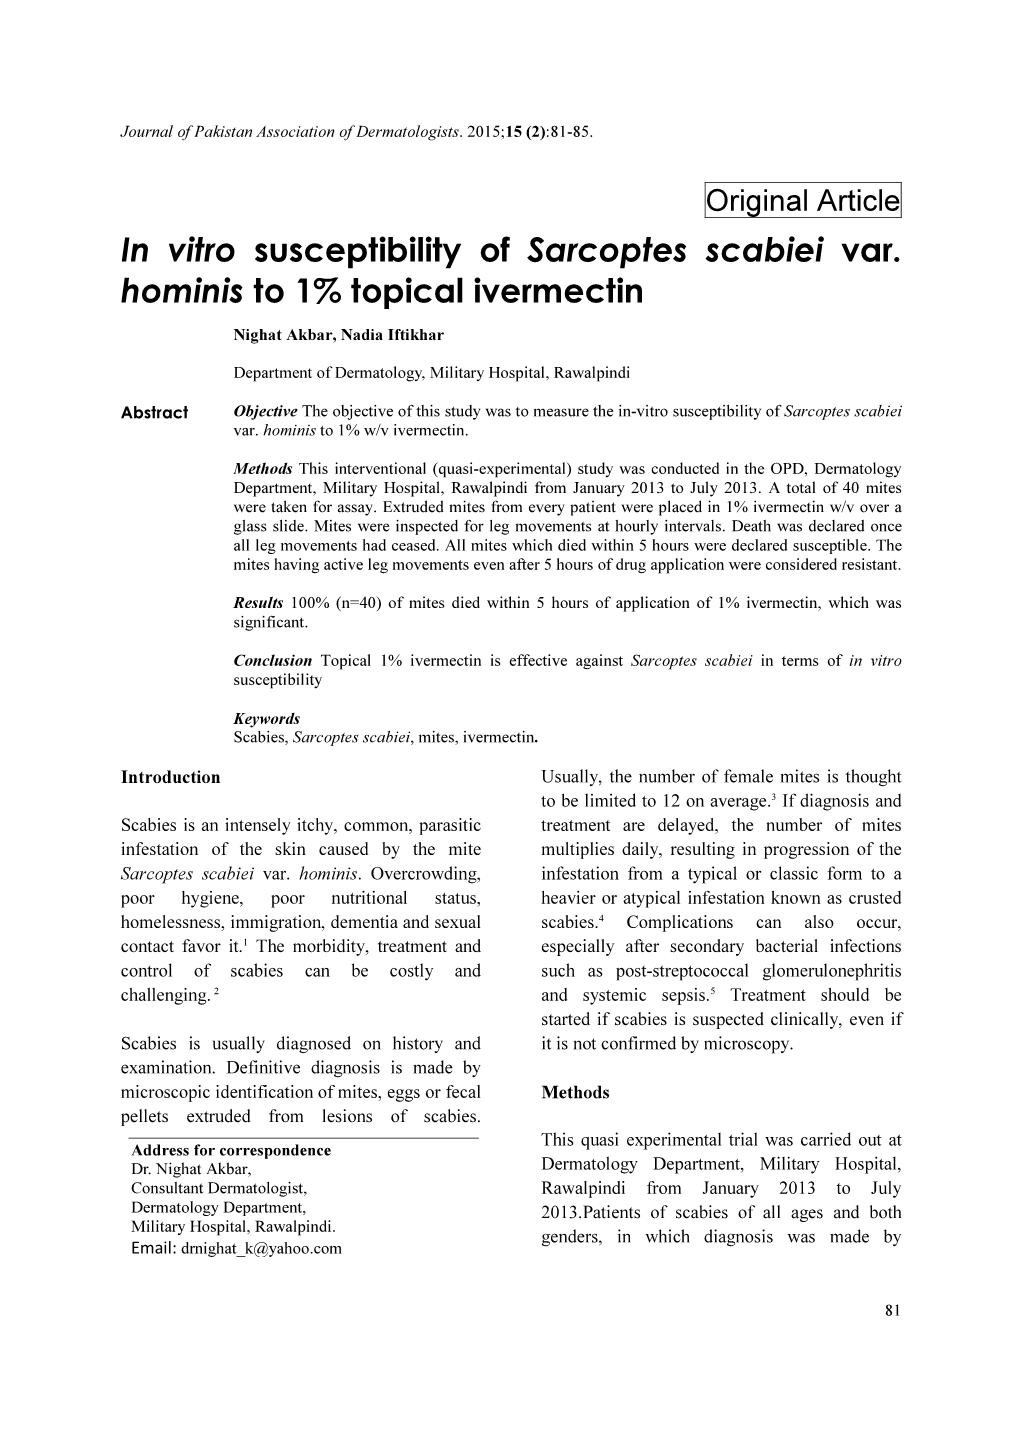 In Vitro Susceptibility of Sarcoptes Scabiei Var. Hominis to 1% Topical Ivermectin